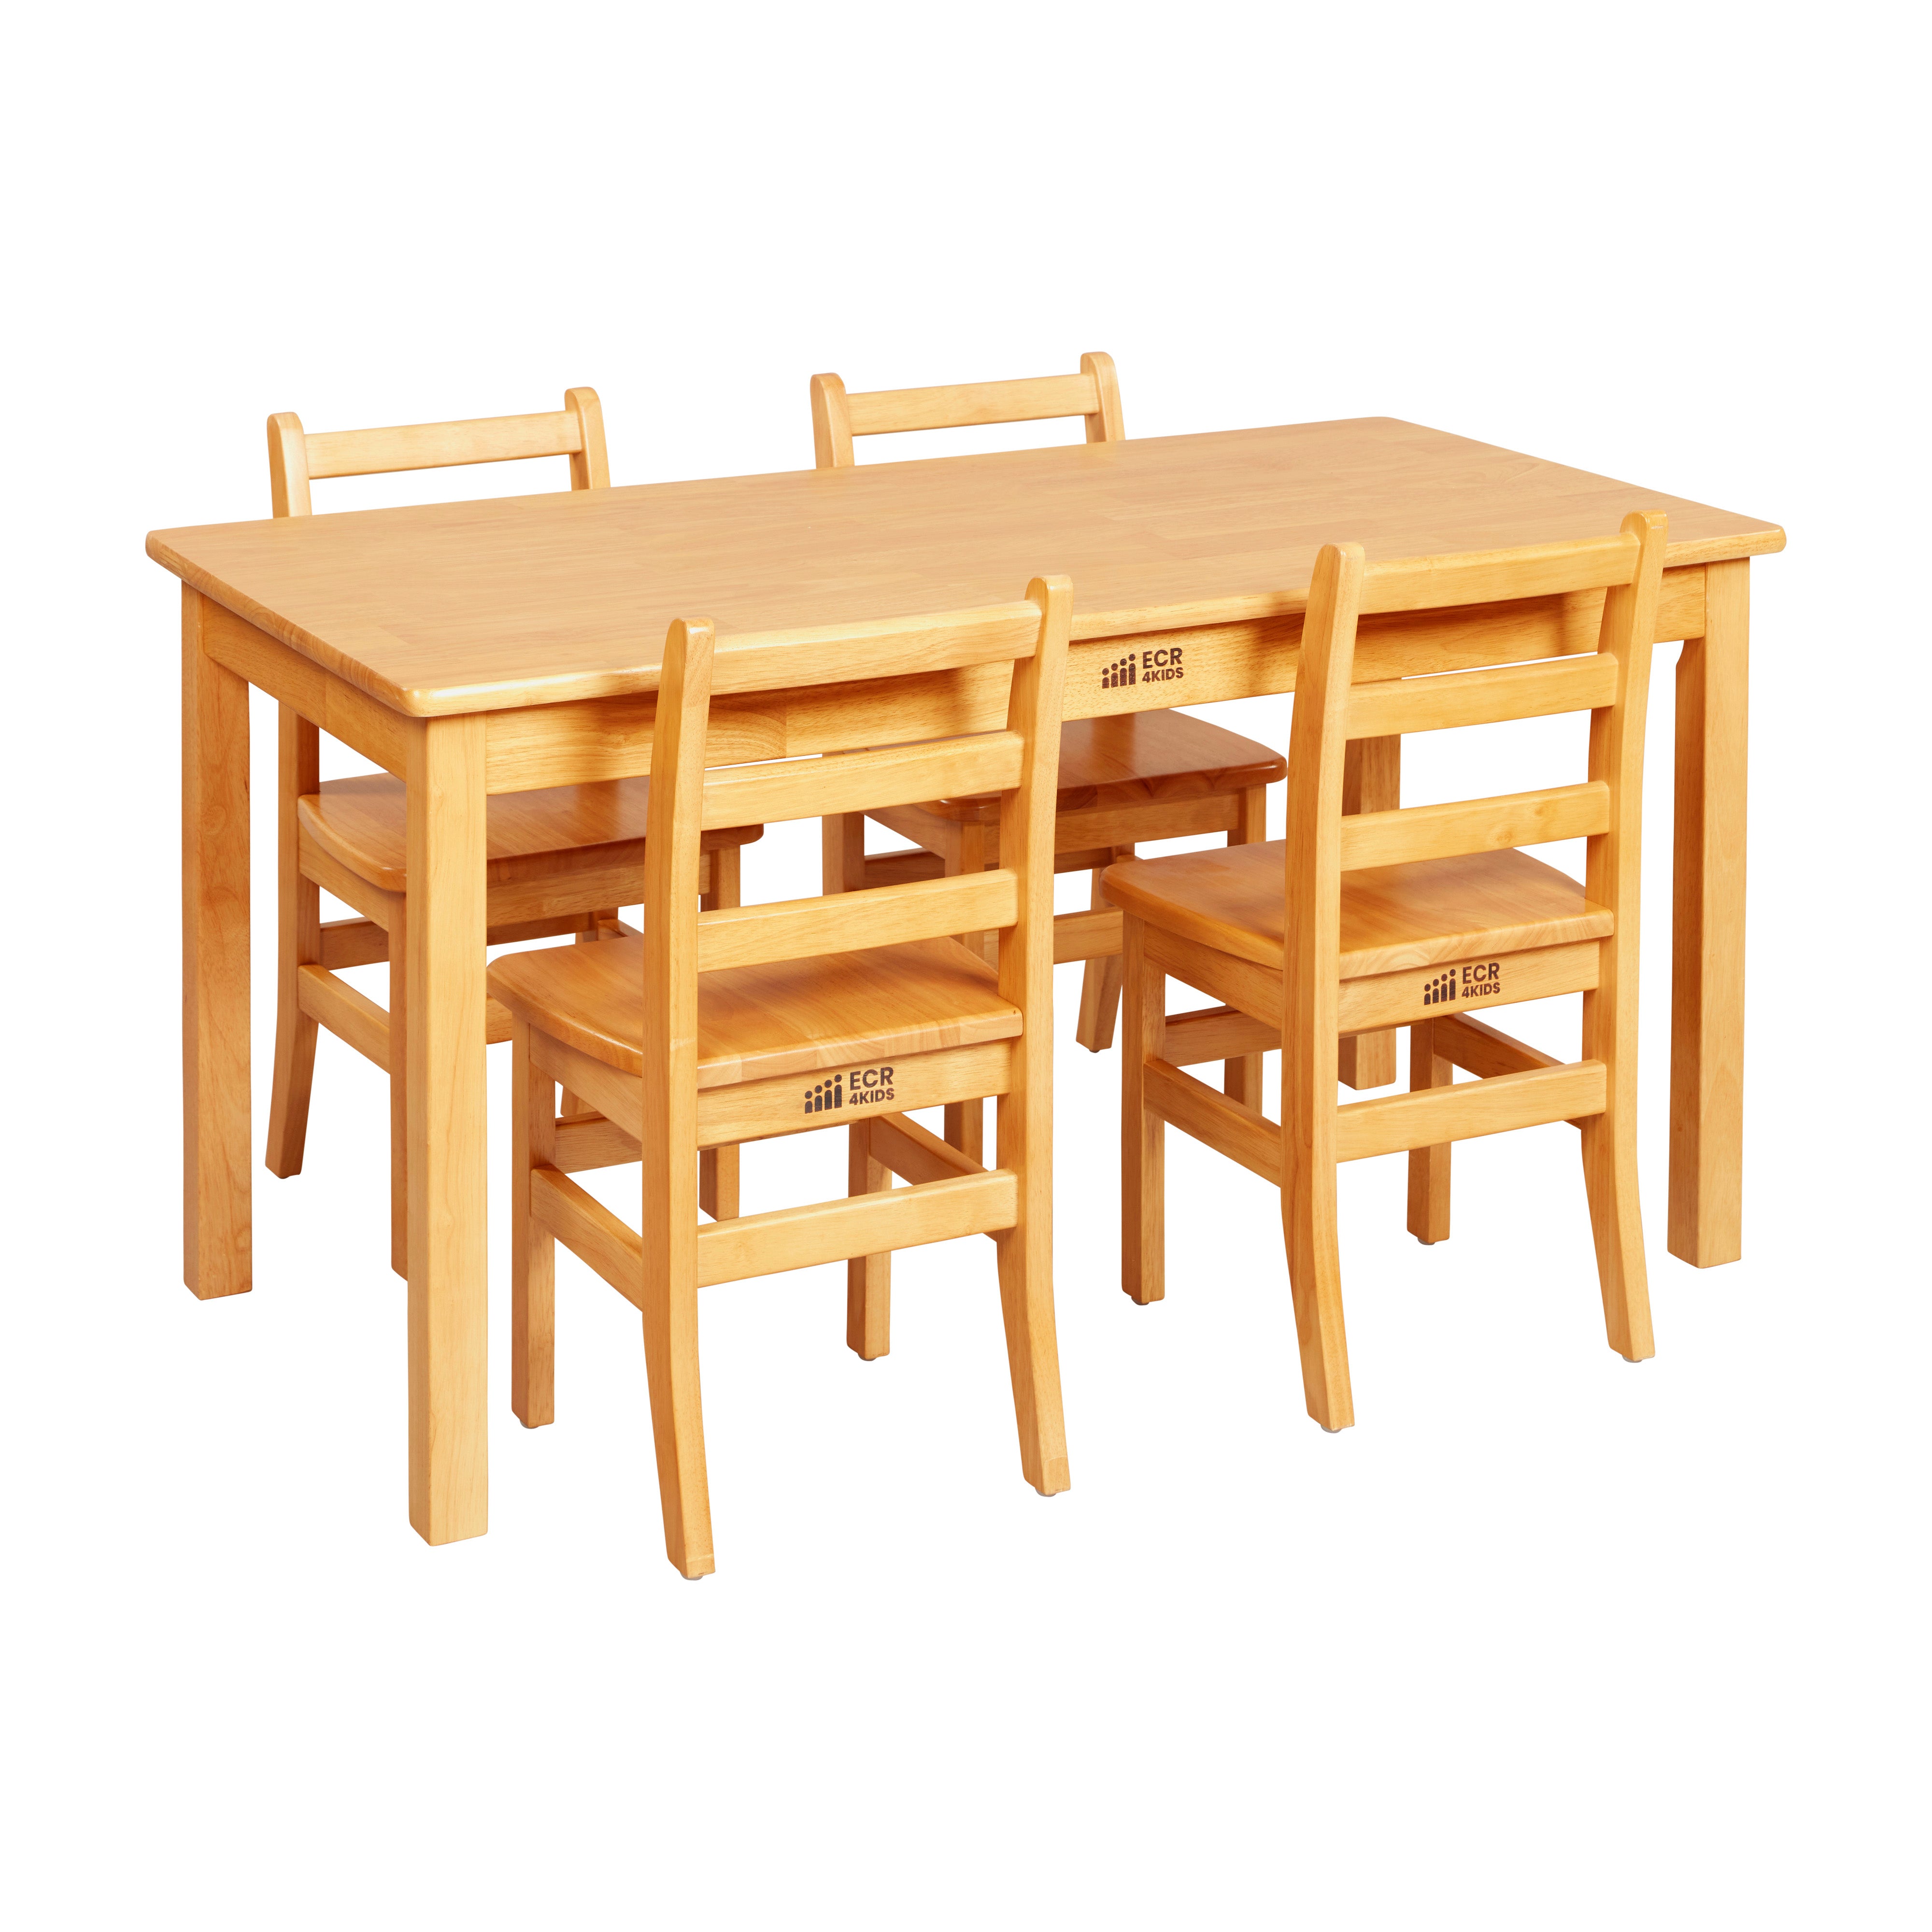 Rectangular Hardwood Table with 24in Legs and Four 14in Chairs, Kids Furniture